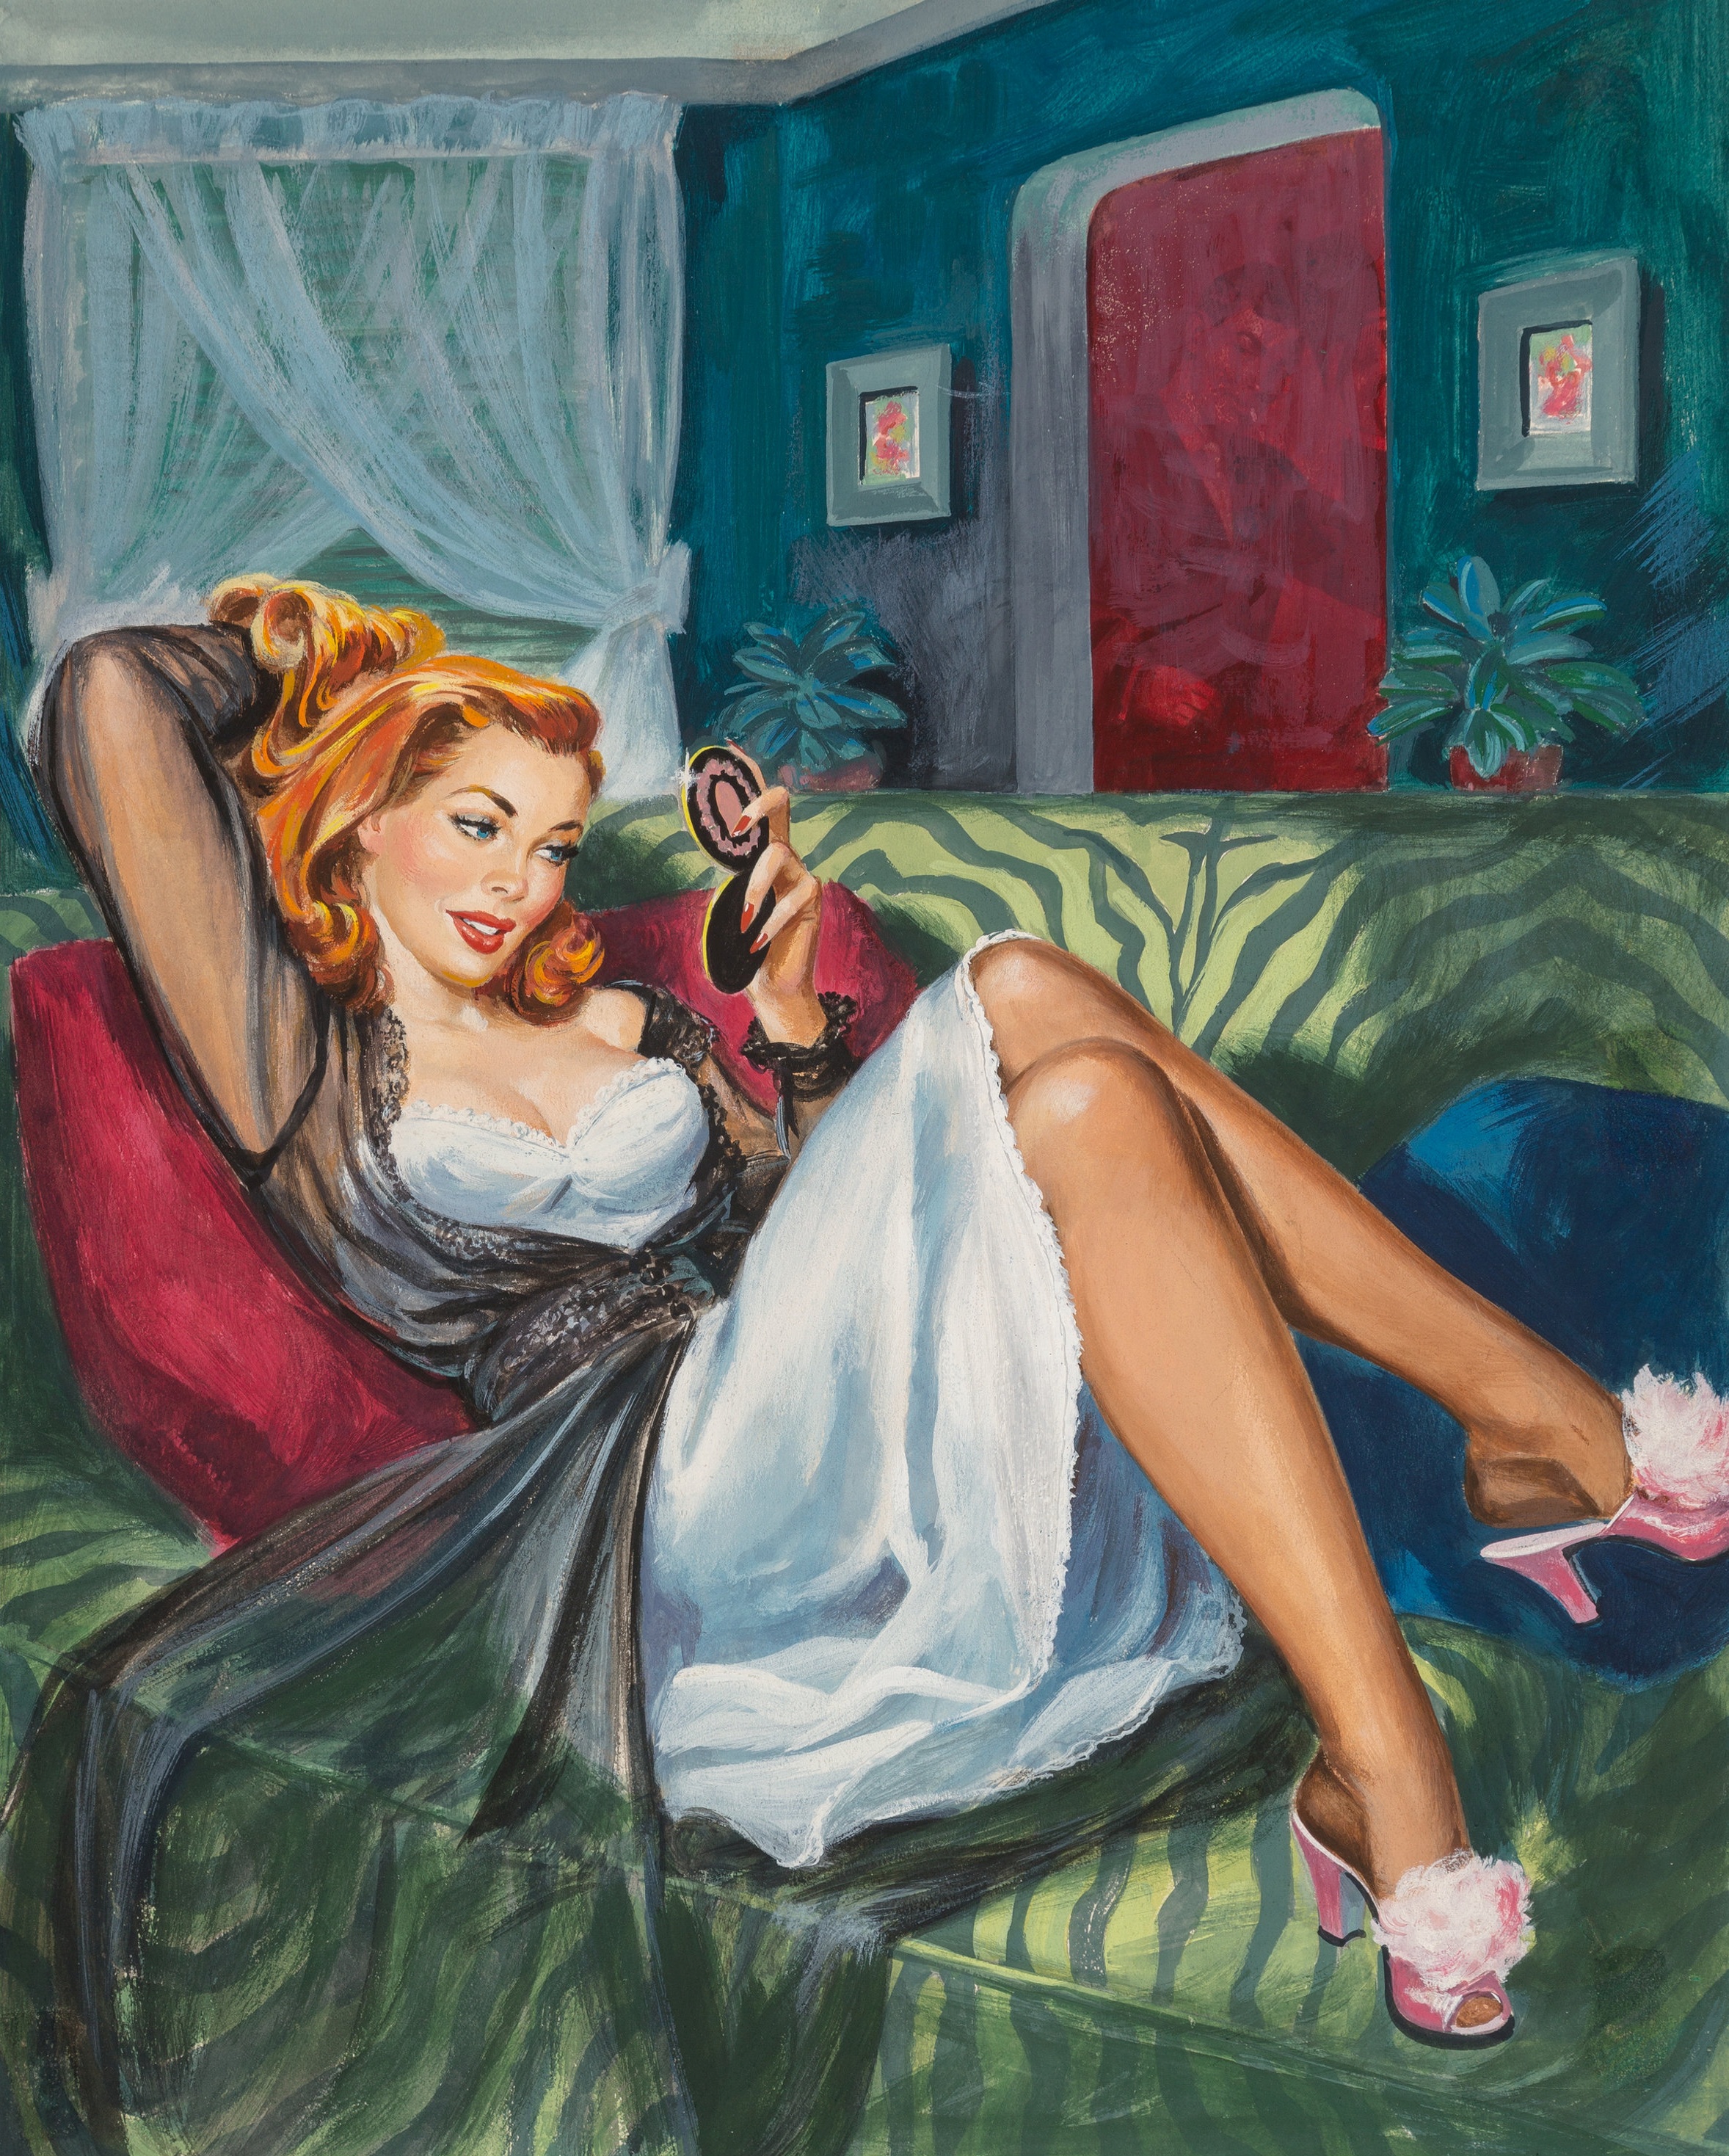 Lady with a Past paperback cover, 1951